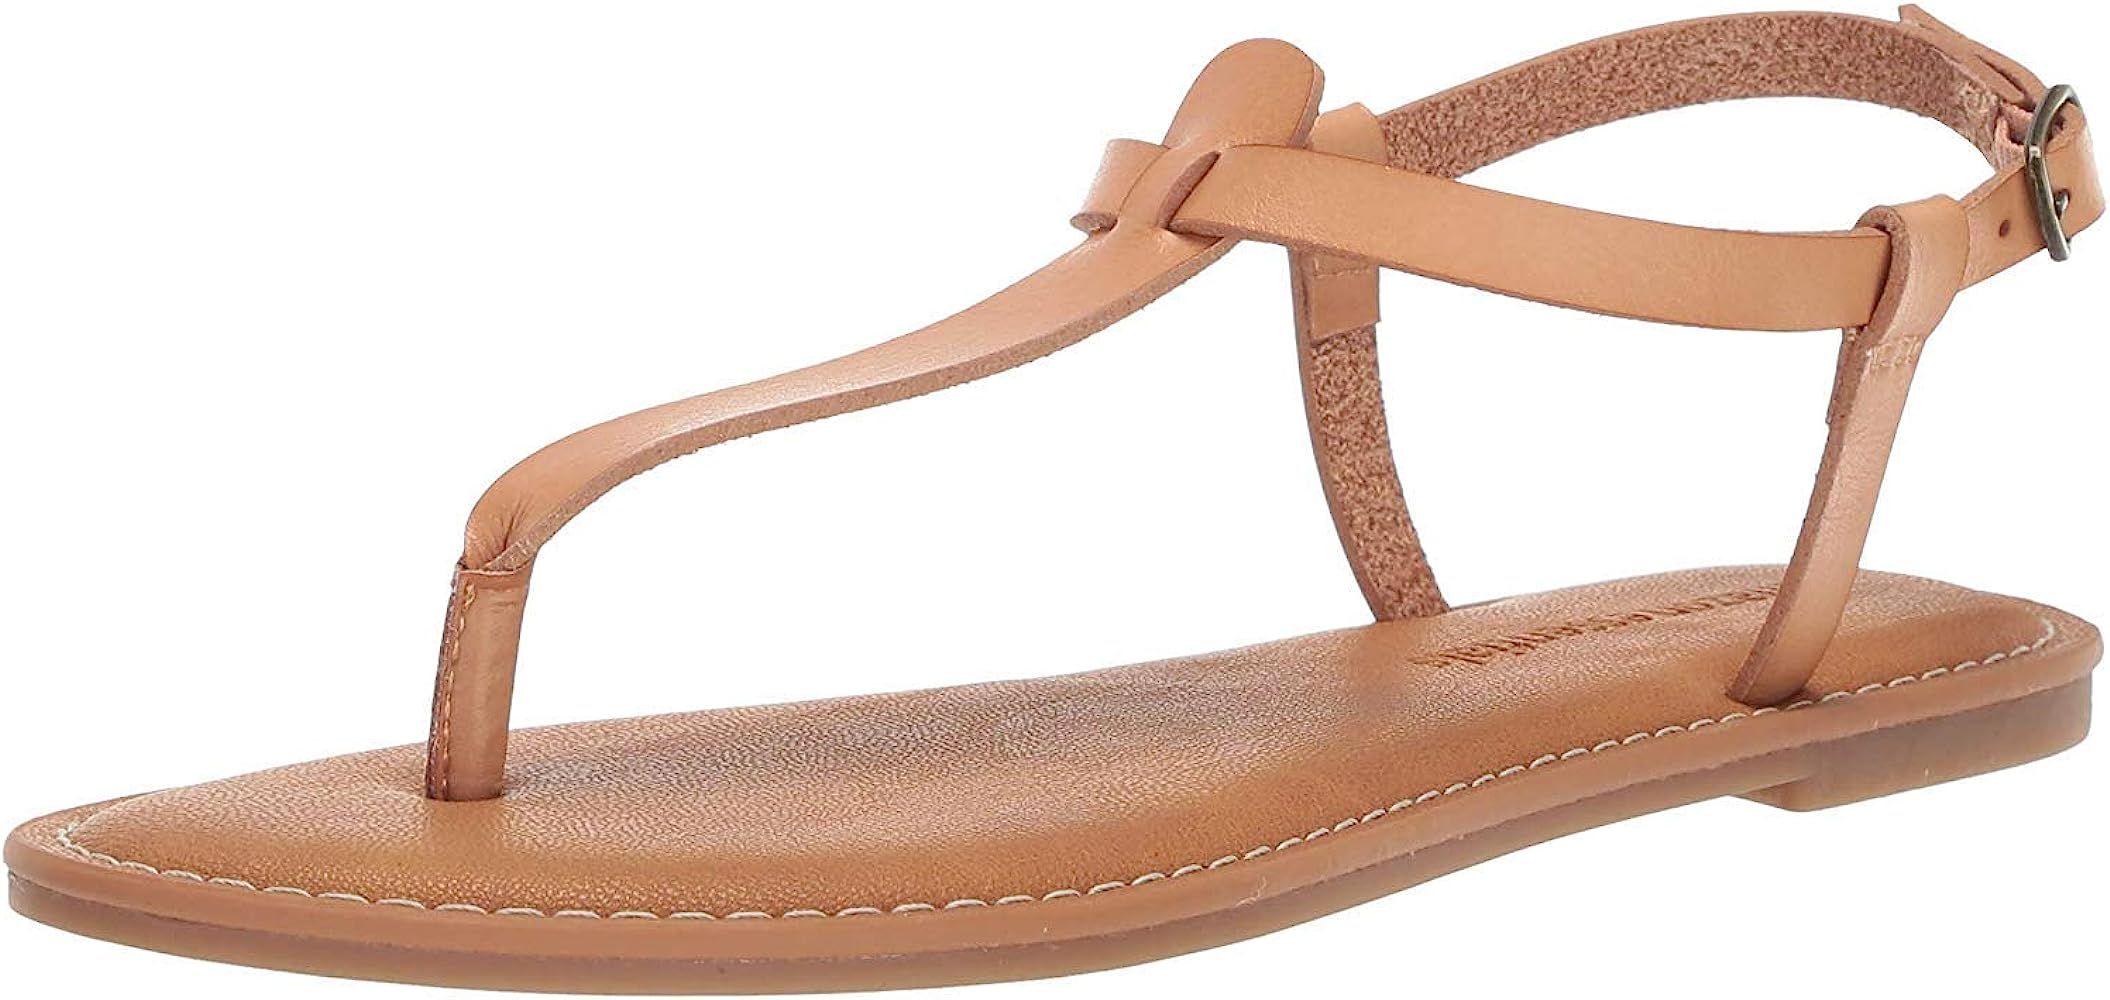 Women's Casual Thong with Ankle Strap Sandal | Amazon (US)